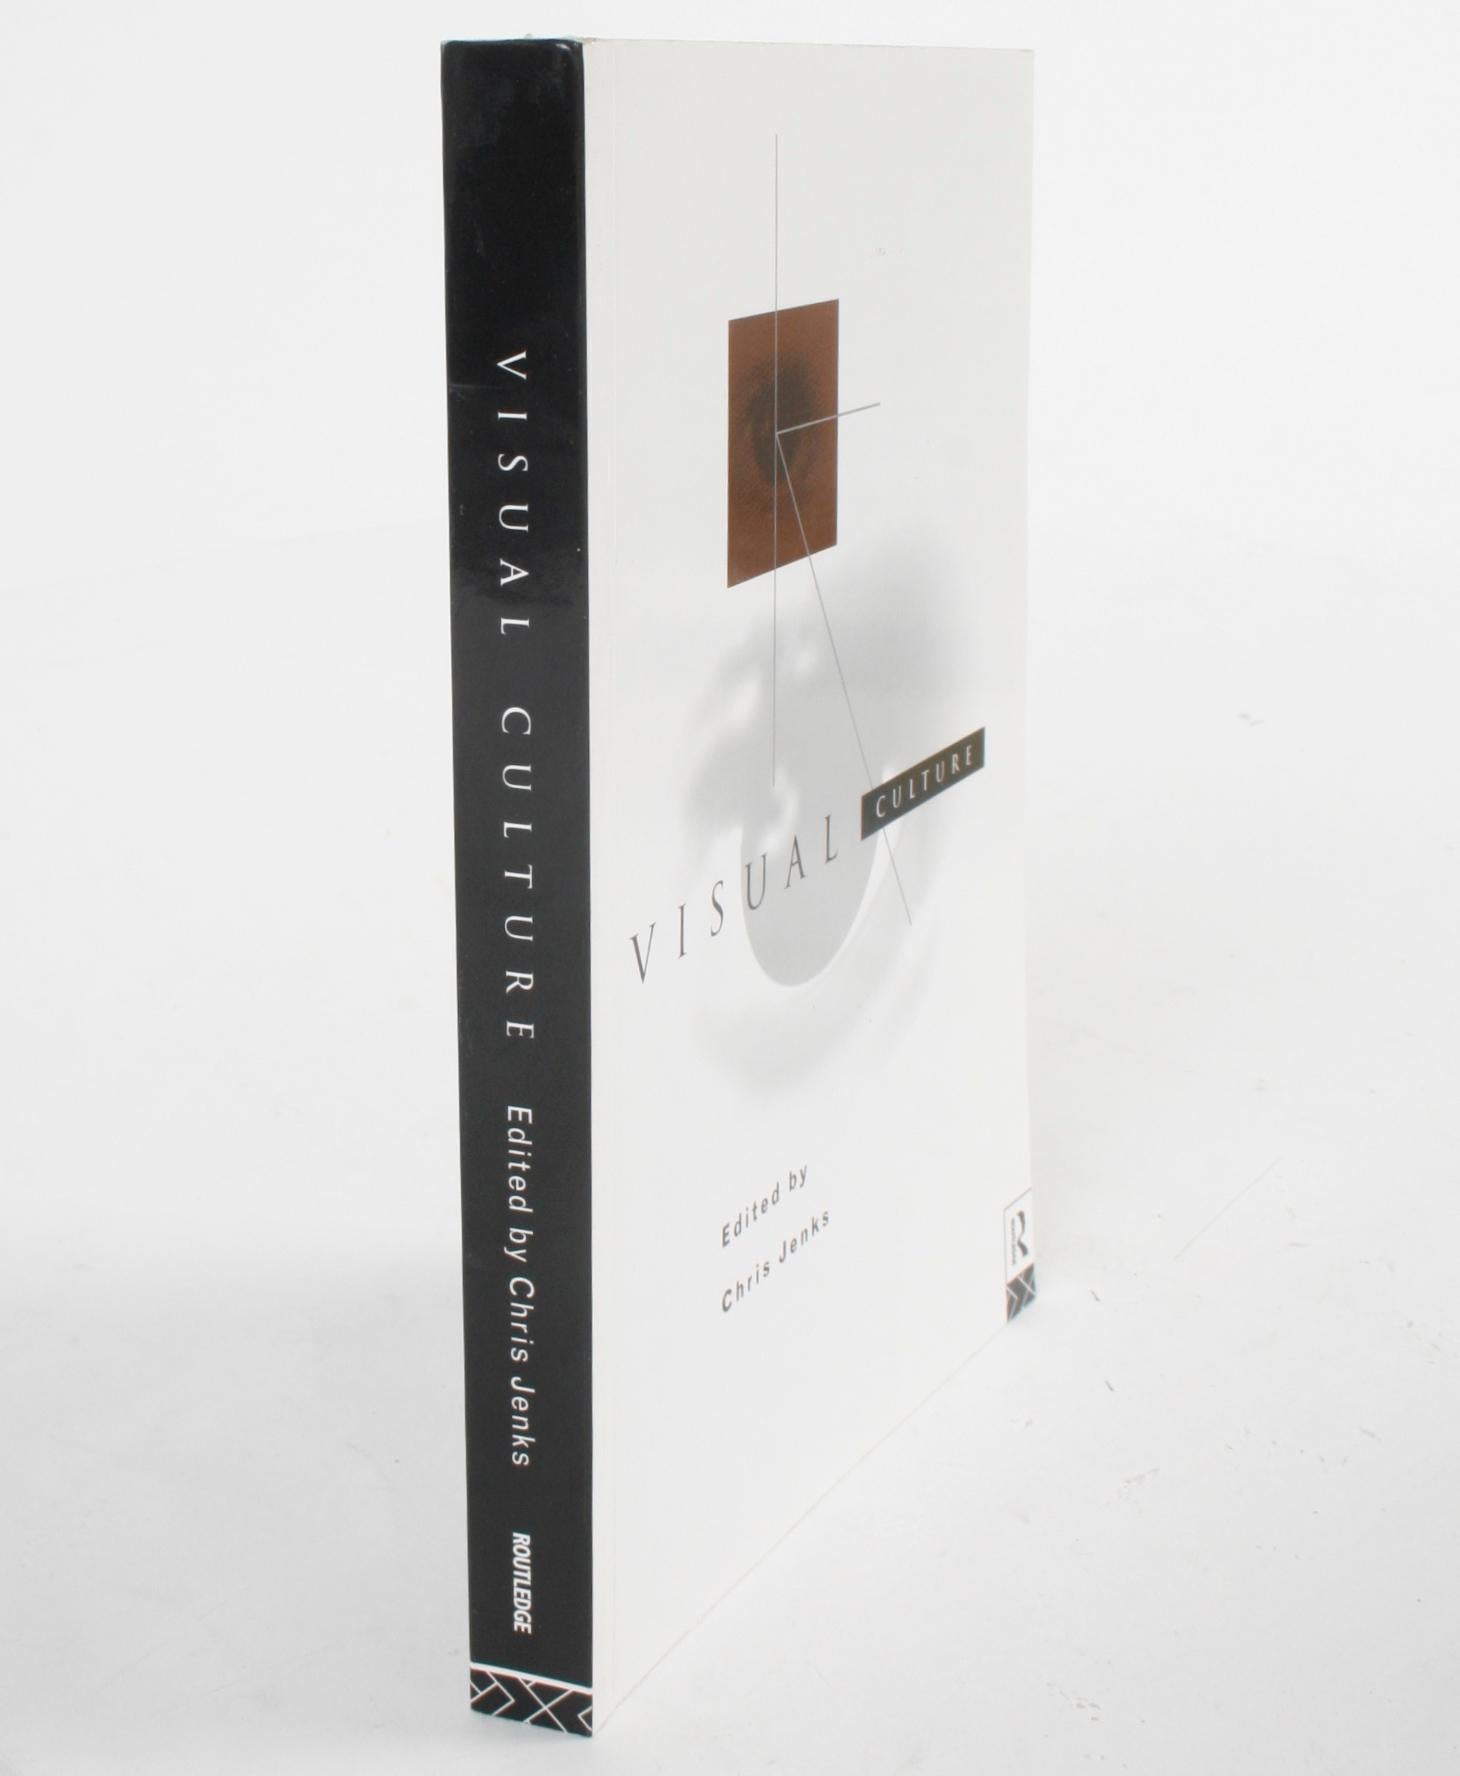 Visual Culture edited by Chris Jenks. London and New York: Routledge, 1995. First edition softcover. 269 pp. An exploration of the 'visual' character of contemporary culture in a series of essays. The contributors look at advertising, film, painting